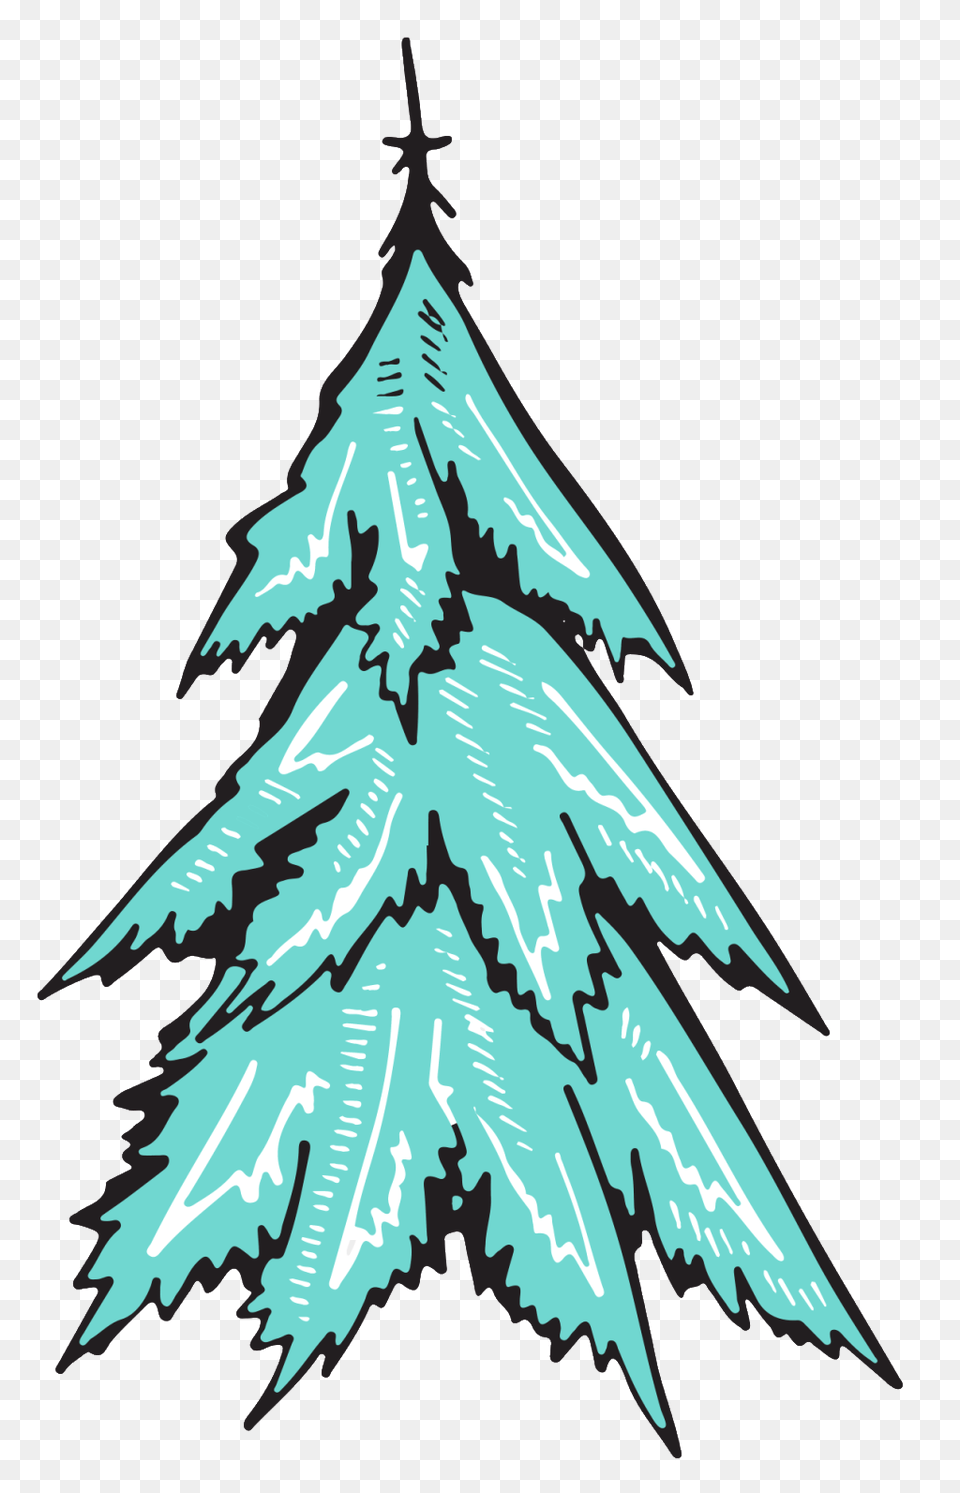 Hand Painted Watercolor Christmas Tree Spruce Tree Images, Plant, Fir, Christmas Decorations, Festival Free Png Download